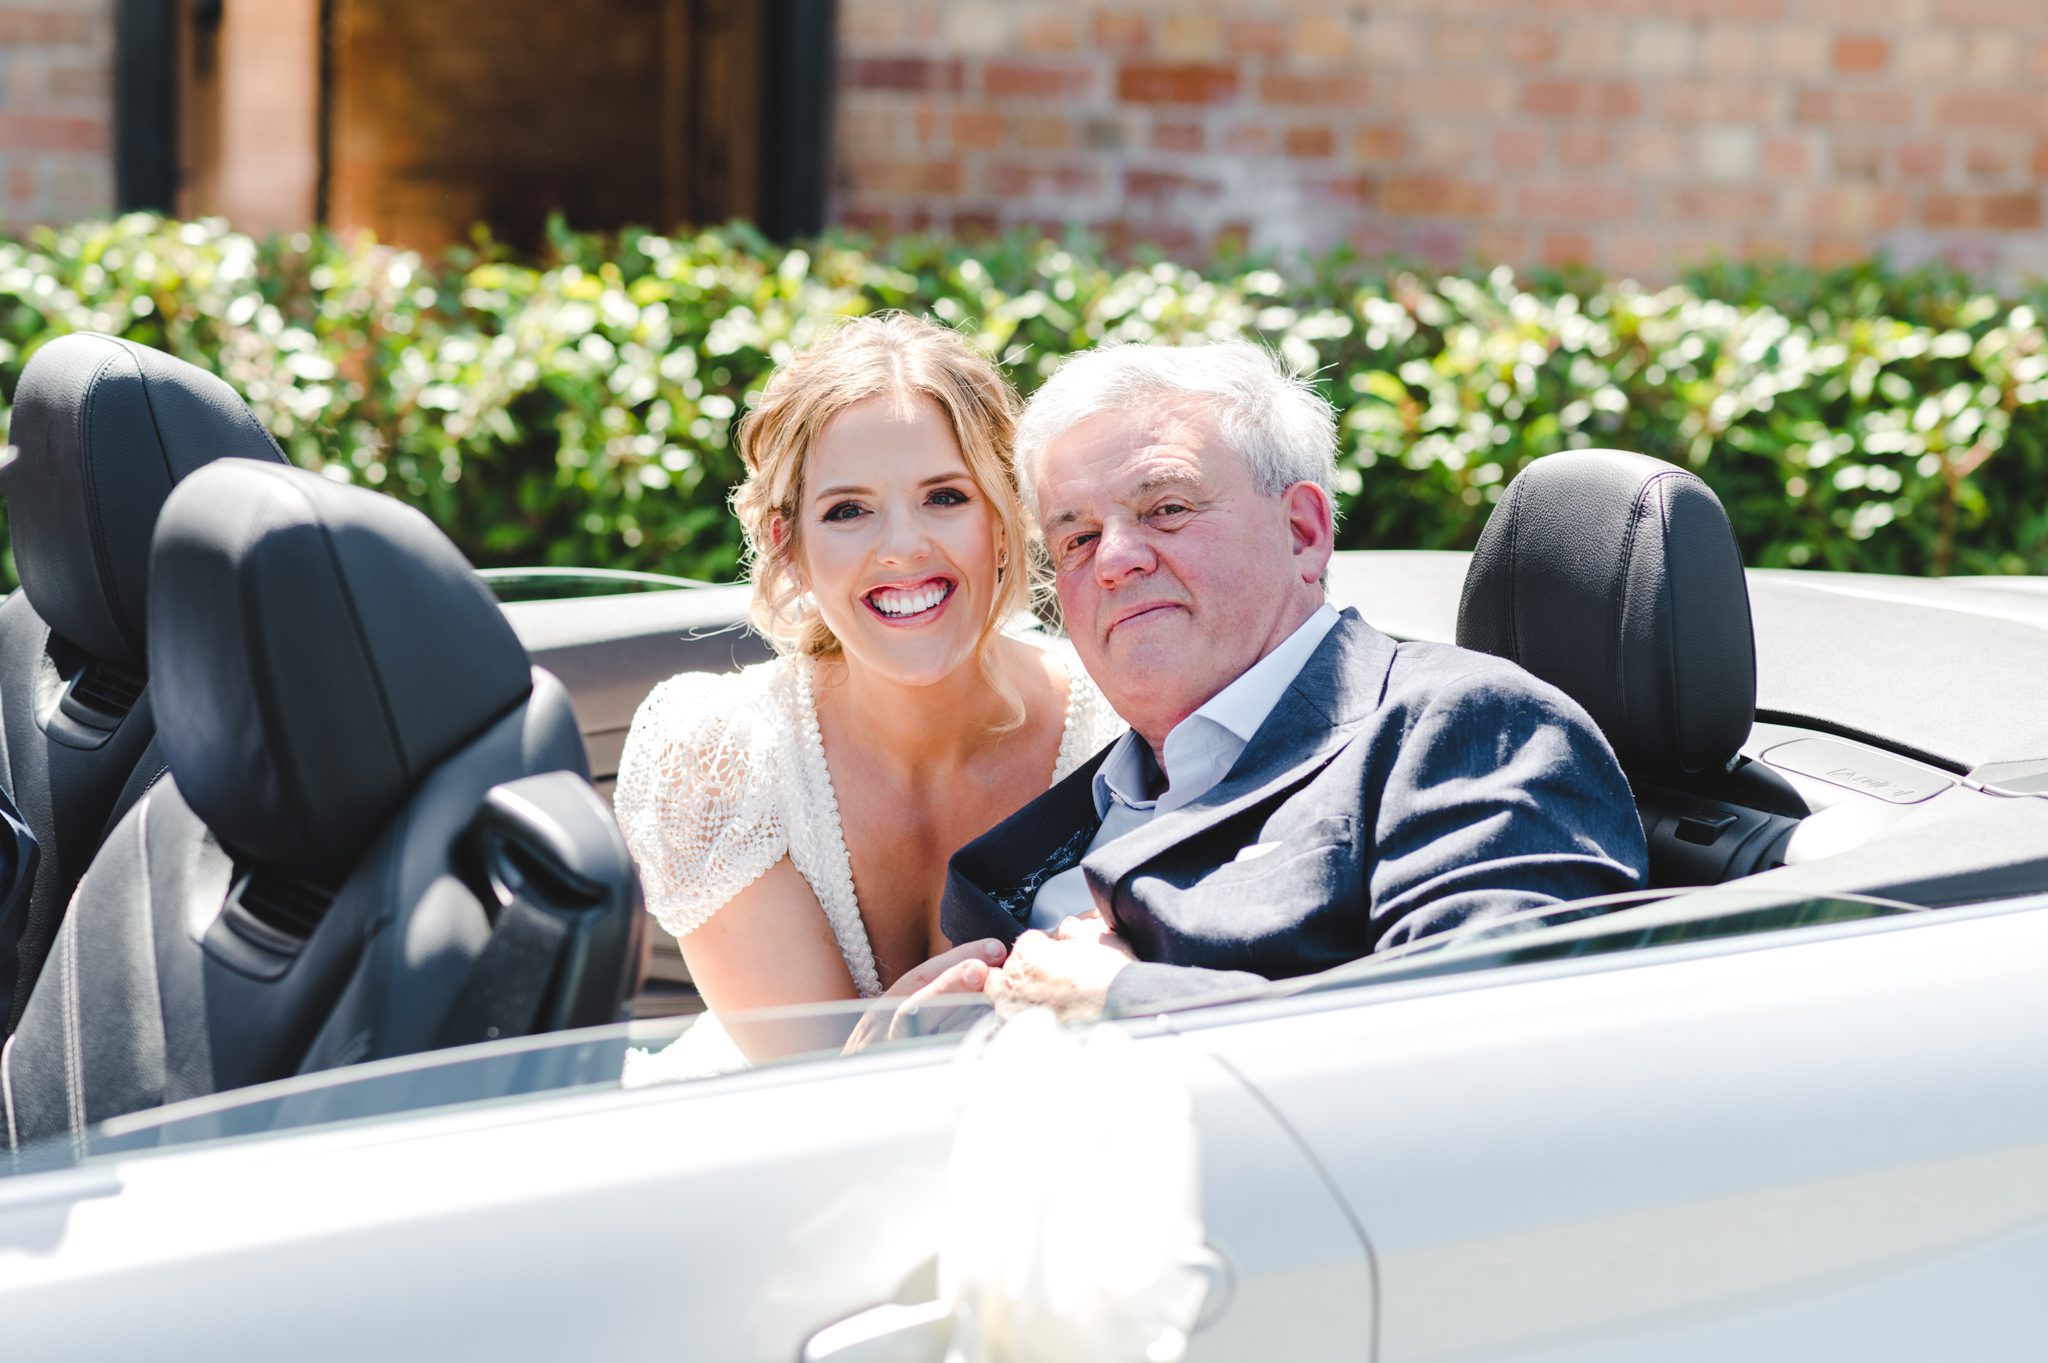 Bride and her father arriving in a blue car for her wedding